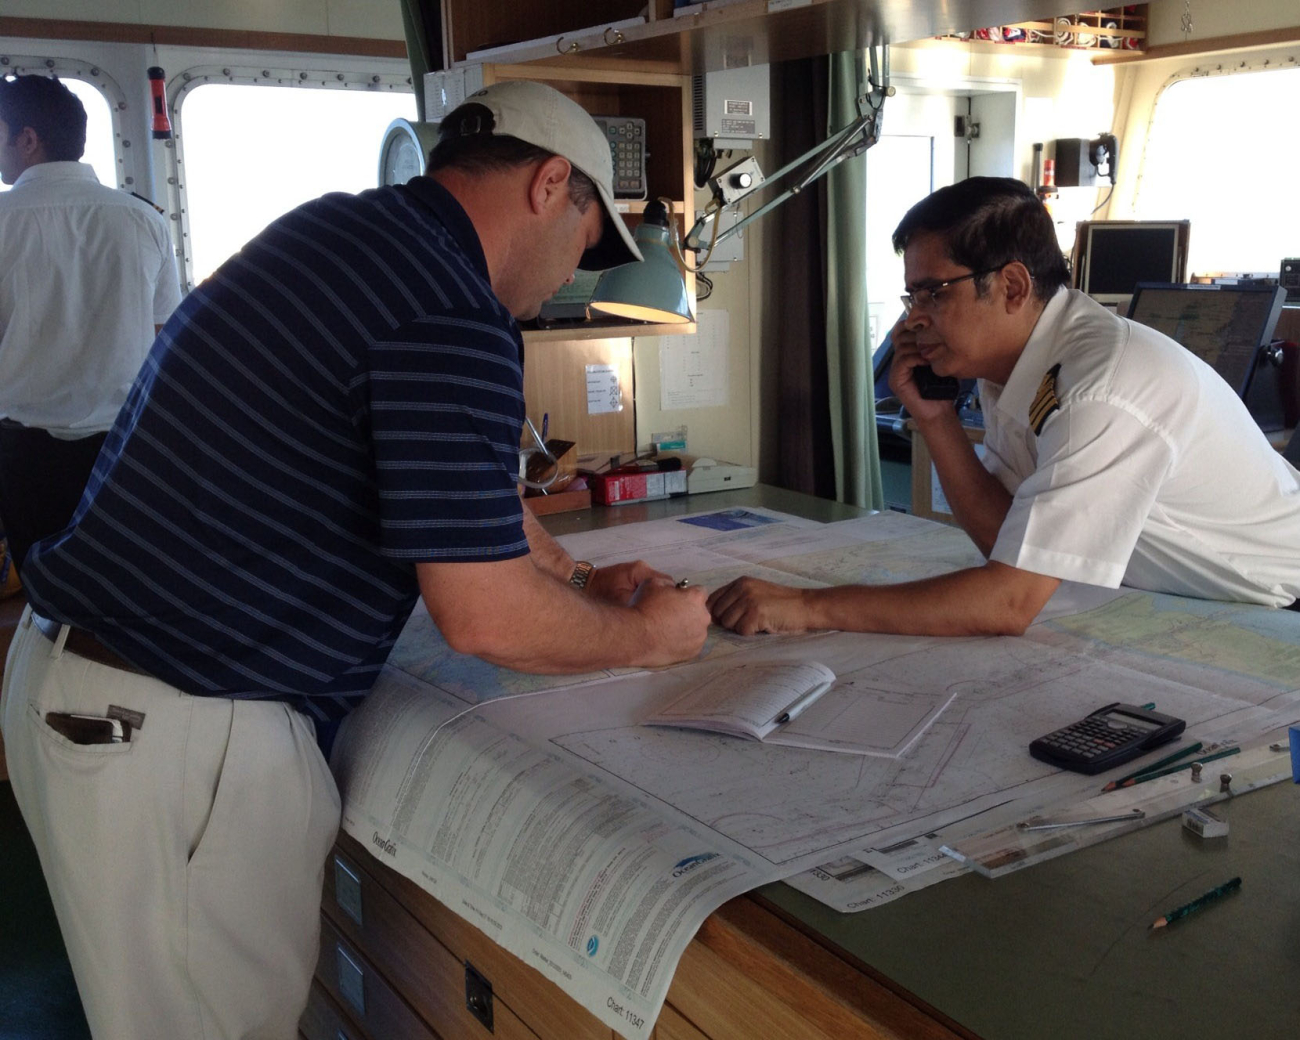 Most mariners now use Print-on-Demand nautical charts that are up-to-date to the moment of printing